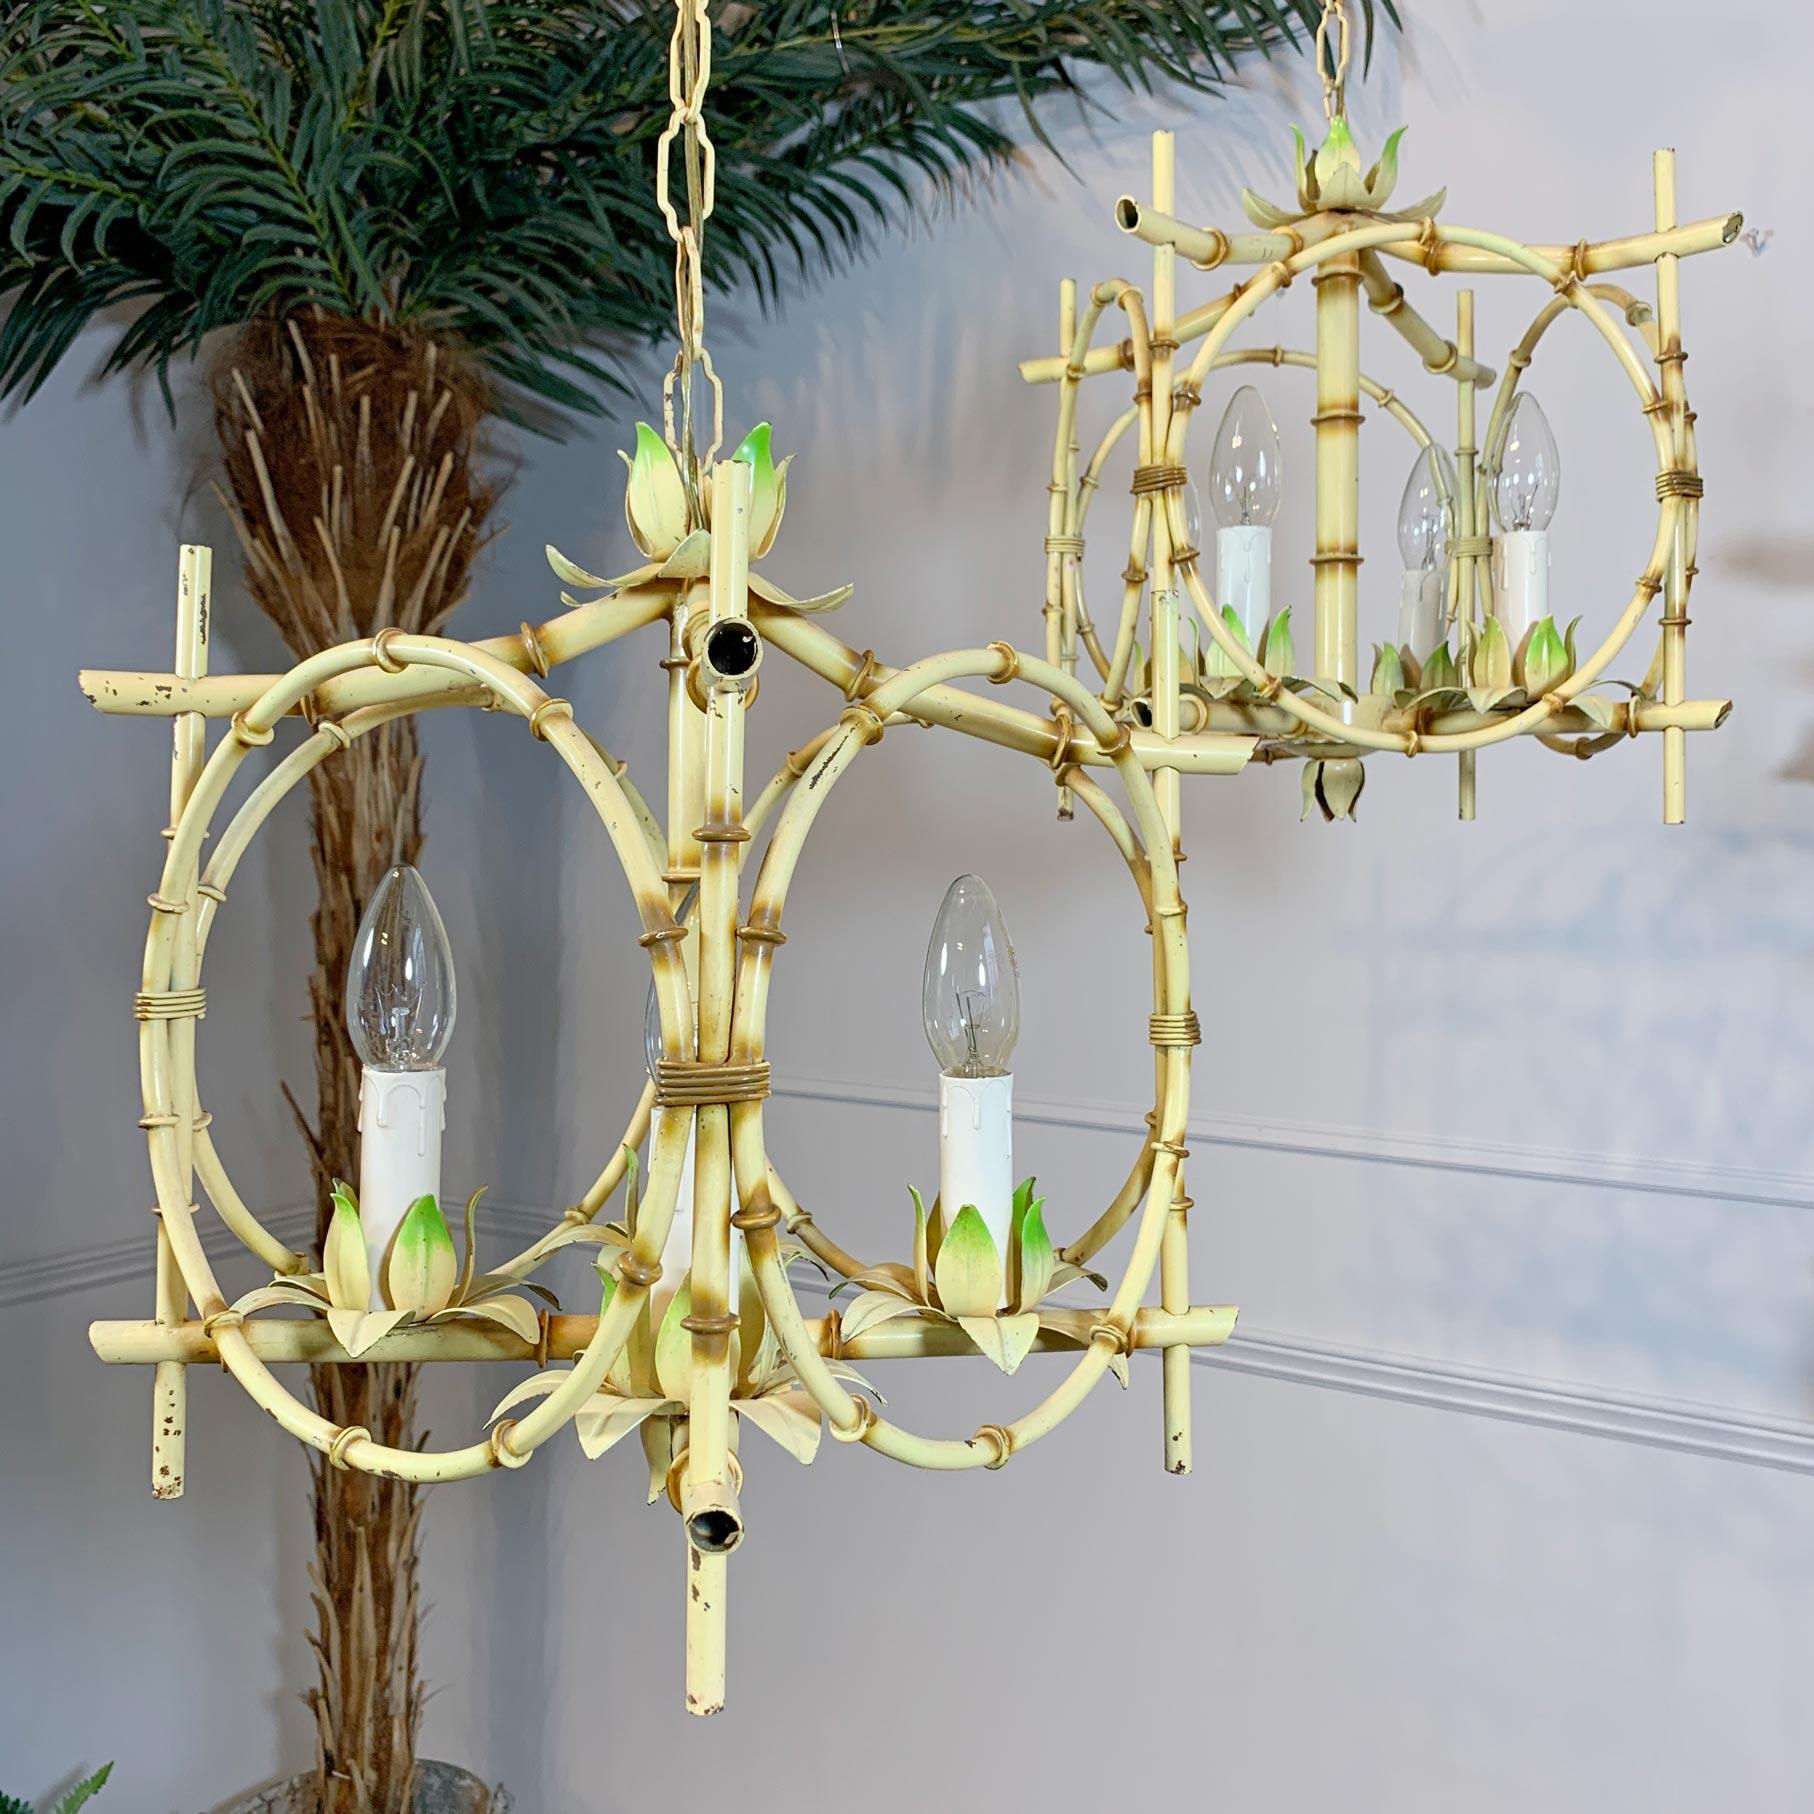 Pair of Faux Bamboo Pagoda Chandeliers Italy 1950's For Sale 2